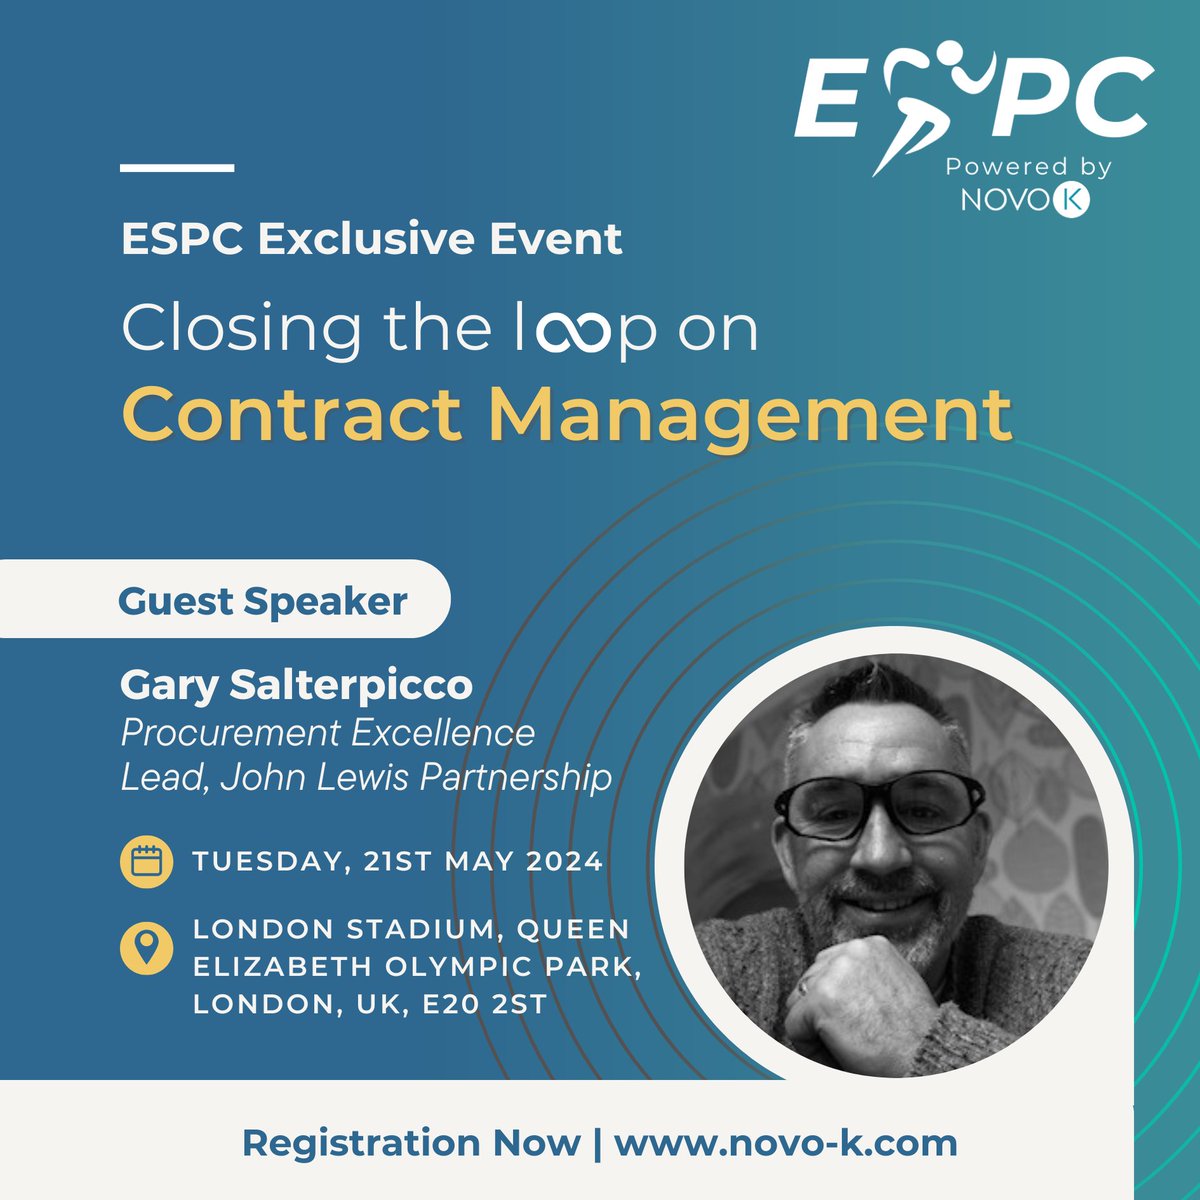 🔔 #EventAlert

Gary Salterpicco will be joining us as a speaker for our event 'Closing the loop on Contract Management.' 

📅 Date: May 21st, 2024
📍 Location: London Stadium

Register here: ow.ly/RItI50Rpejm

#Sports #London #EliteSports #Events #ESPC #Procurement